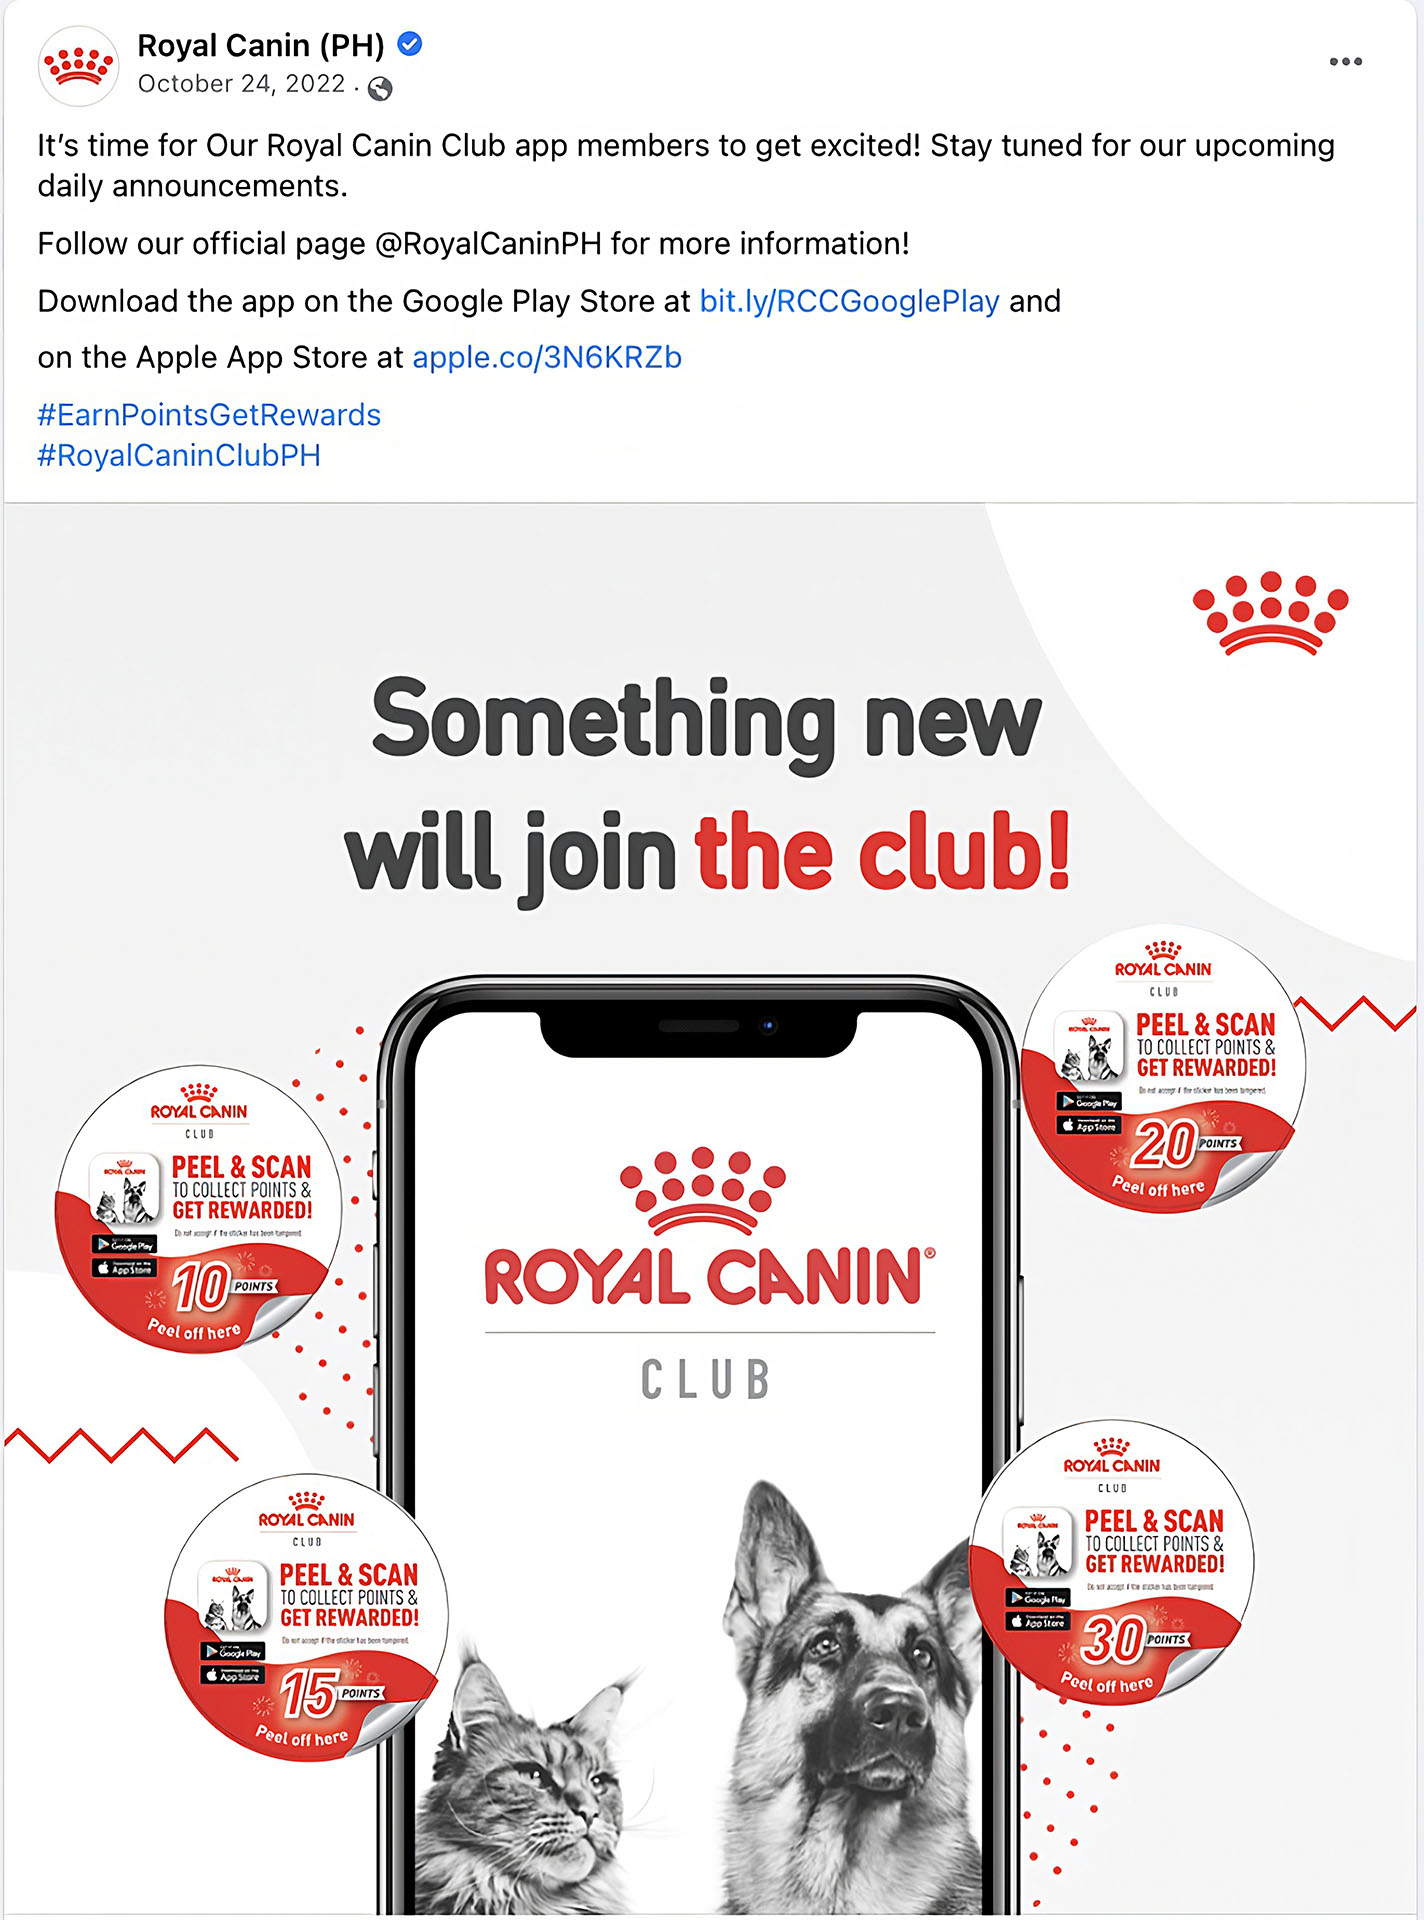 Royal Canin Points on Purchase Online Event (1)